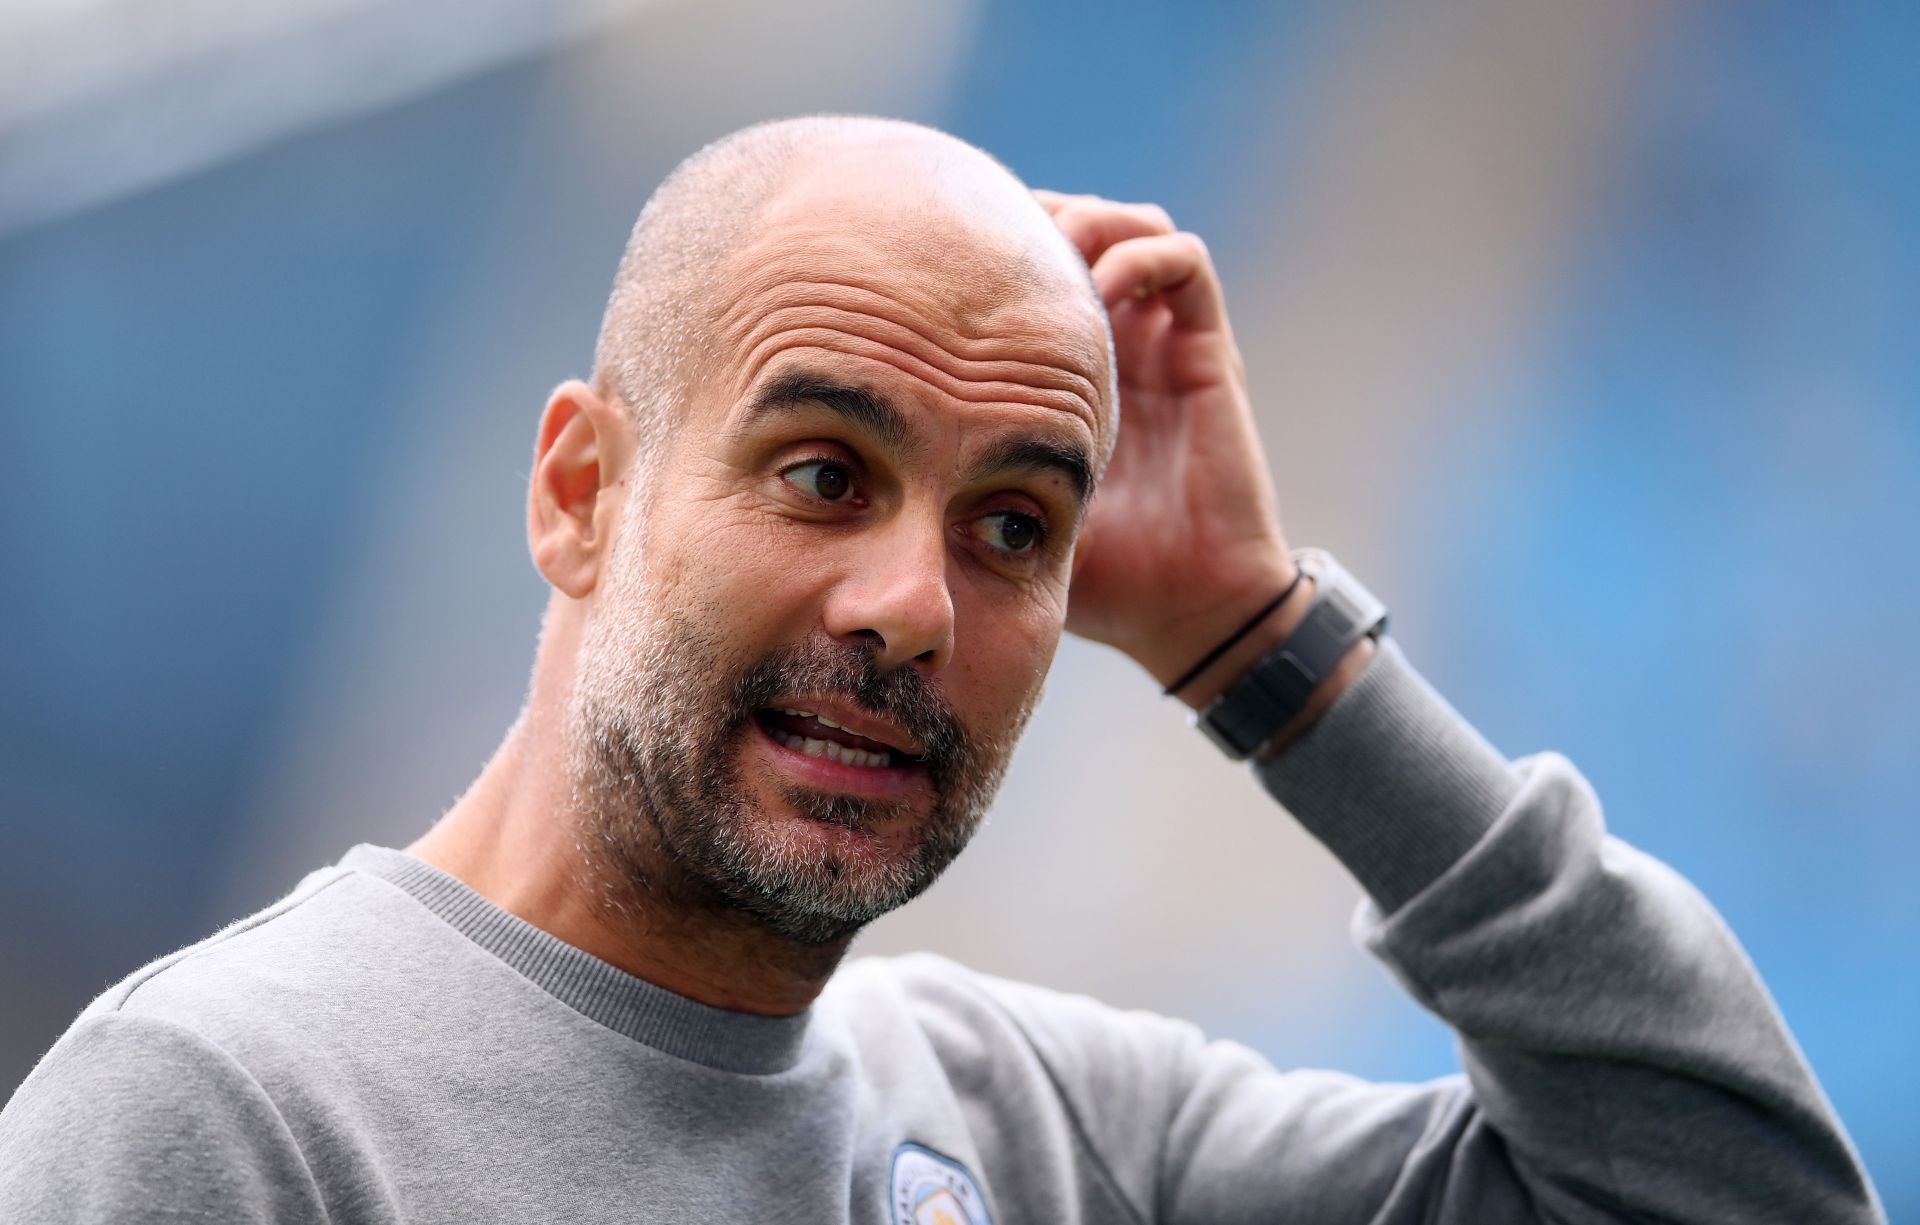 Guardiola is yet to win the Champions League with the Citizens